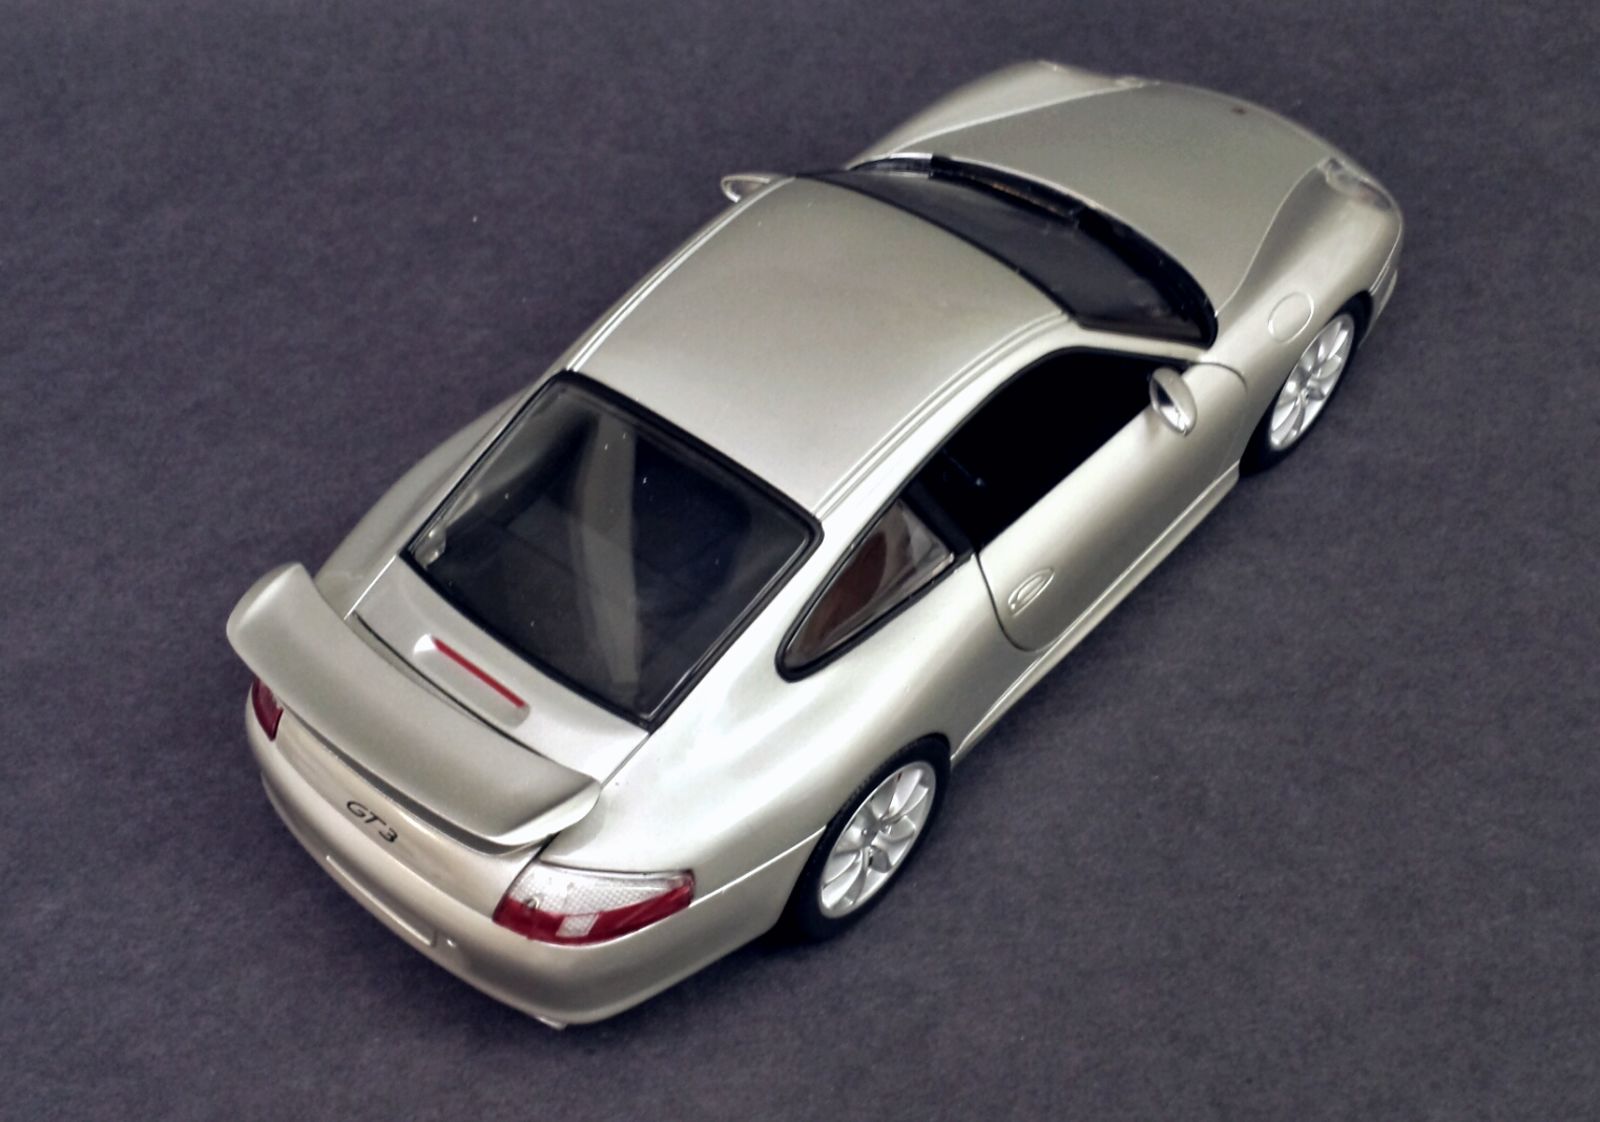 Illustration for article titled Teutonic Tuesday: Porsche 996 GT3